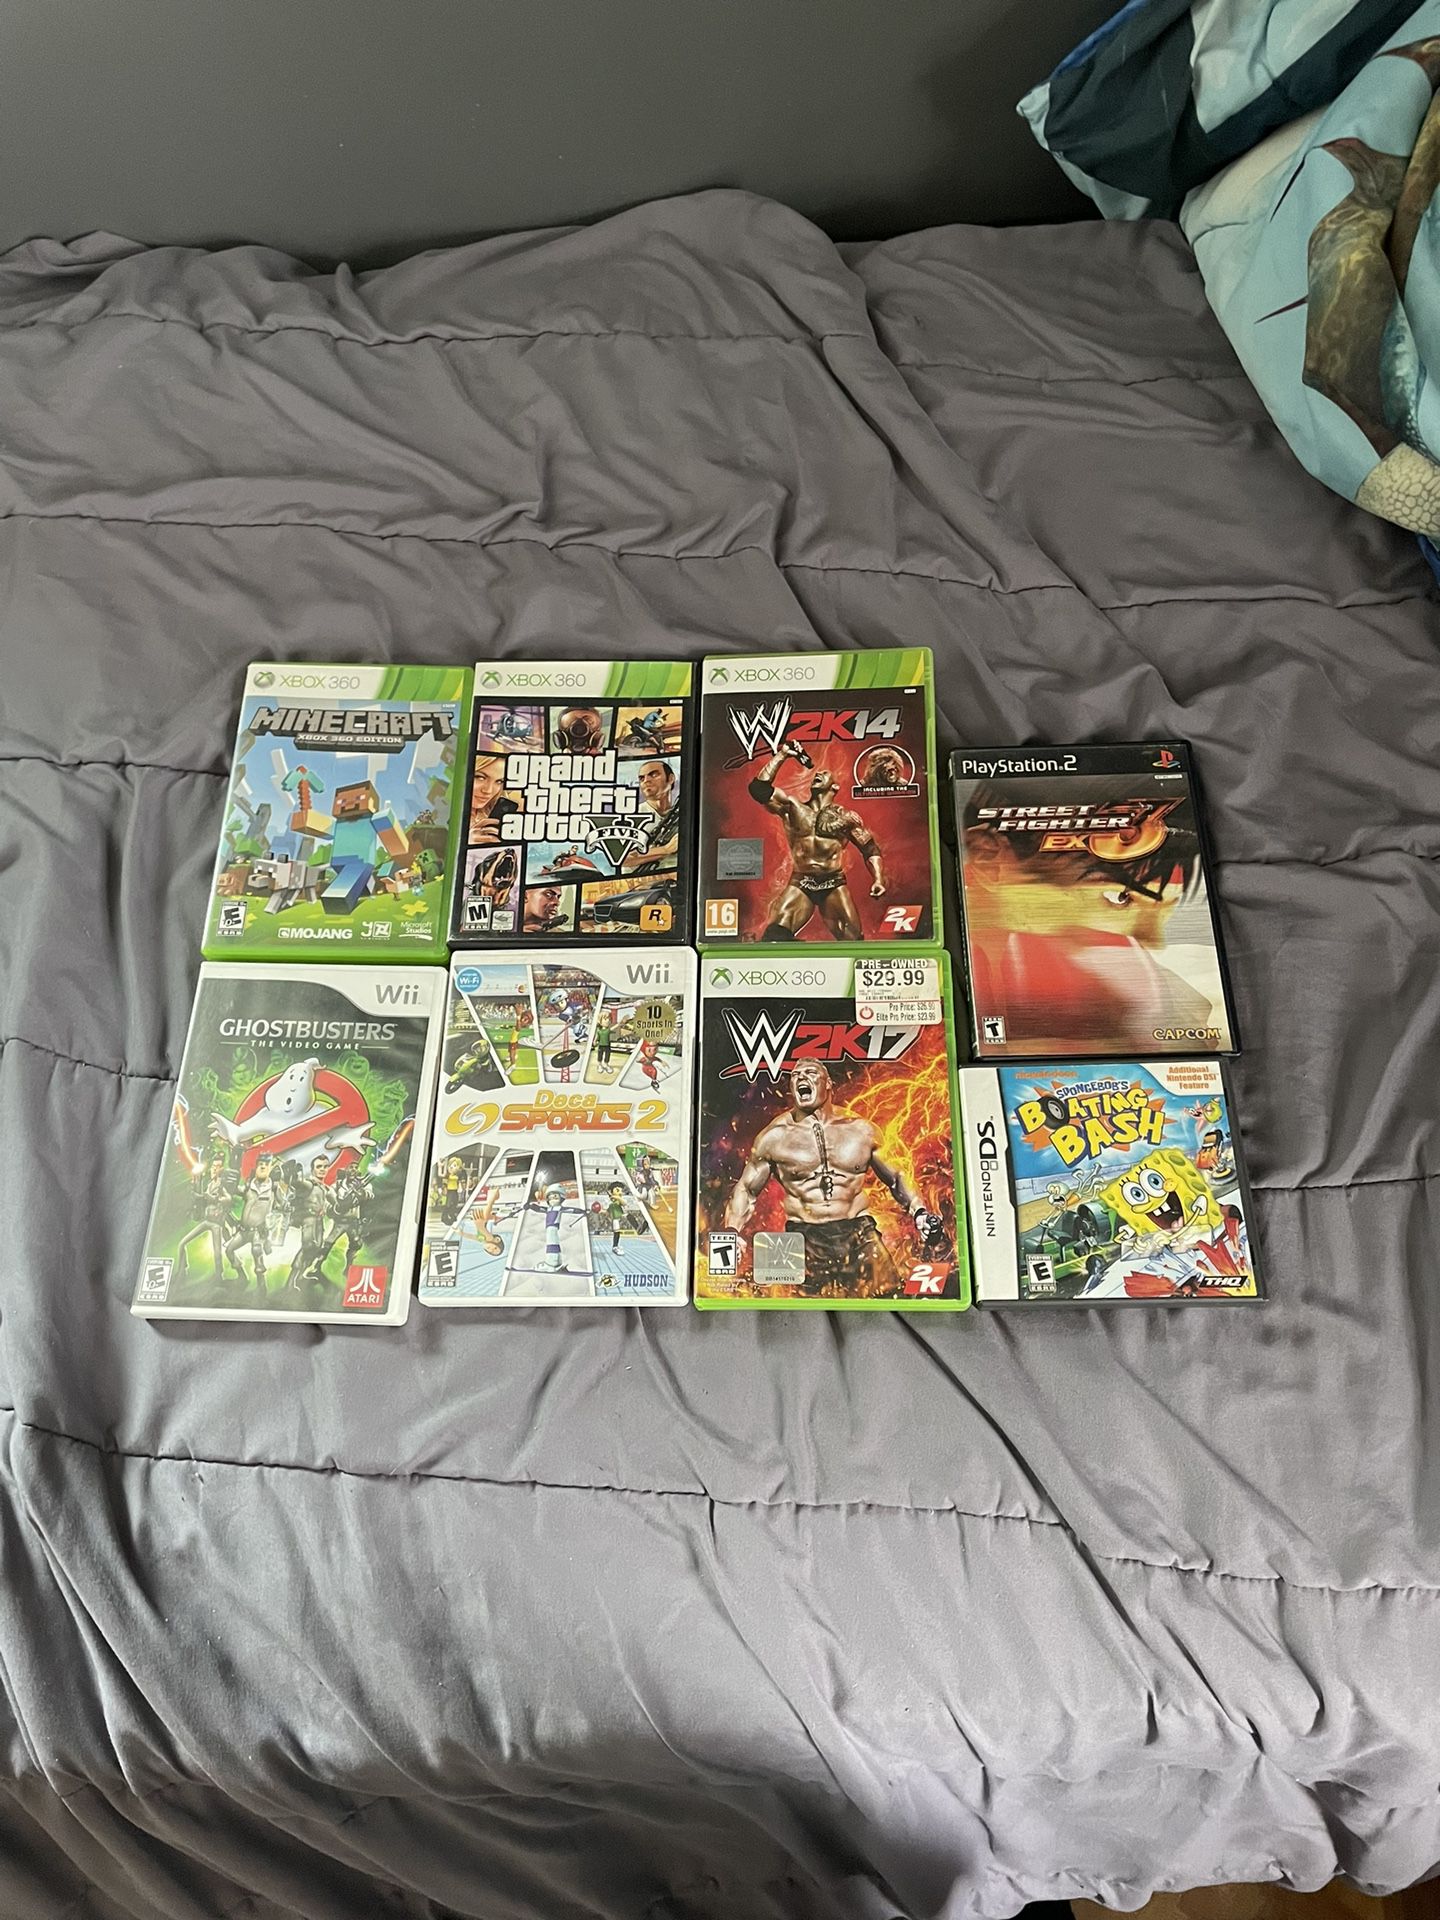 Xbox 360 Wii Ds PlayStation 2 Games